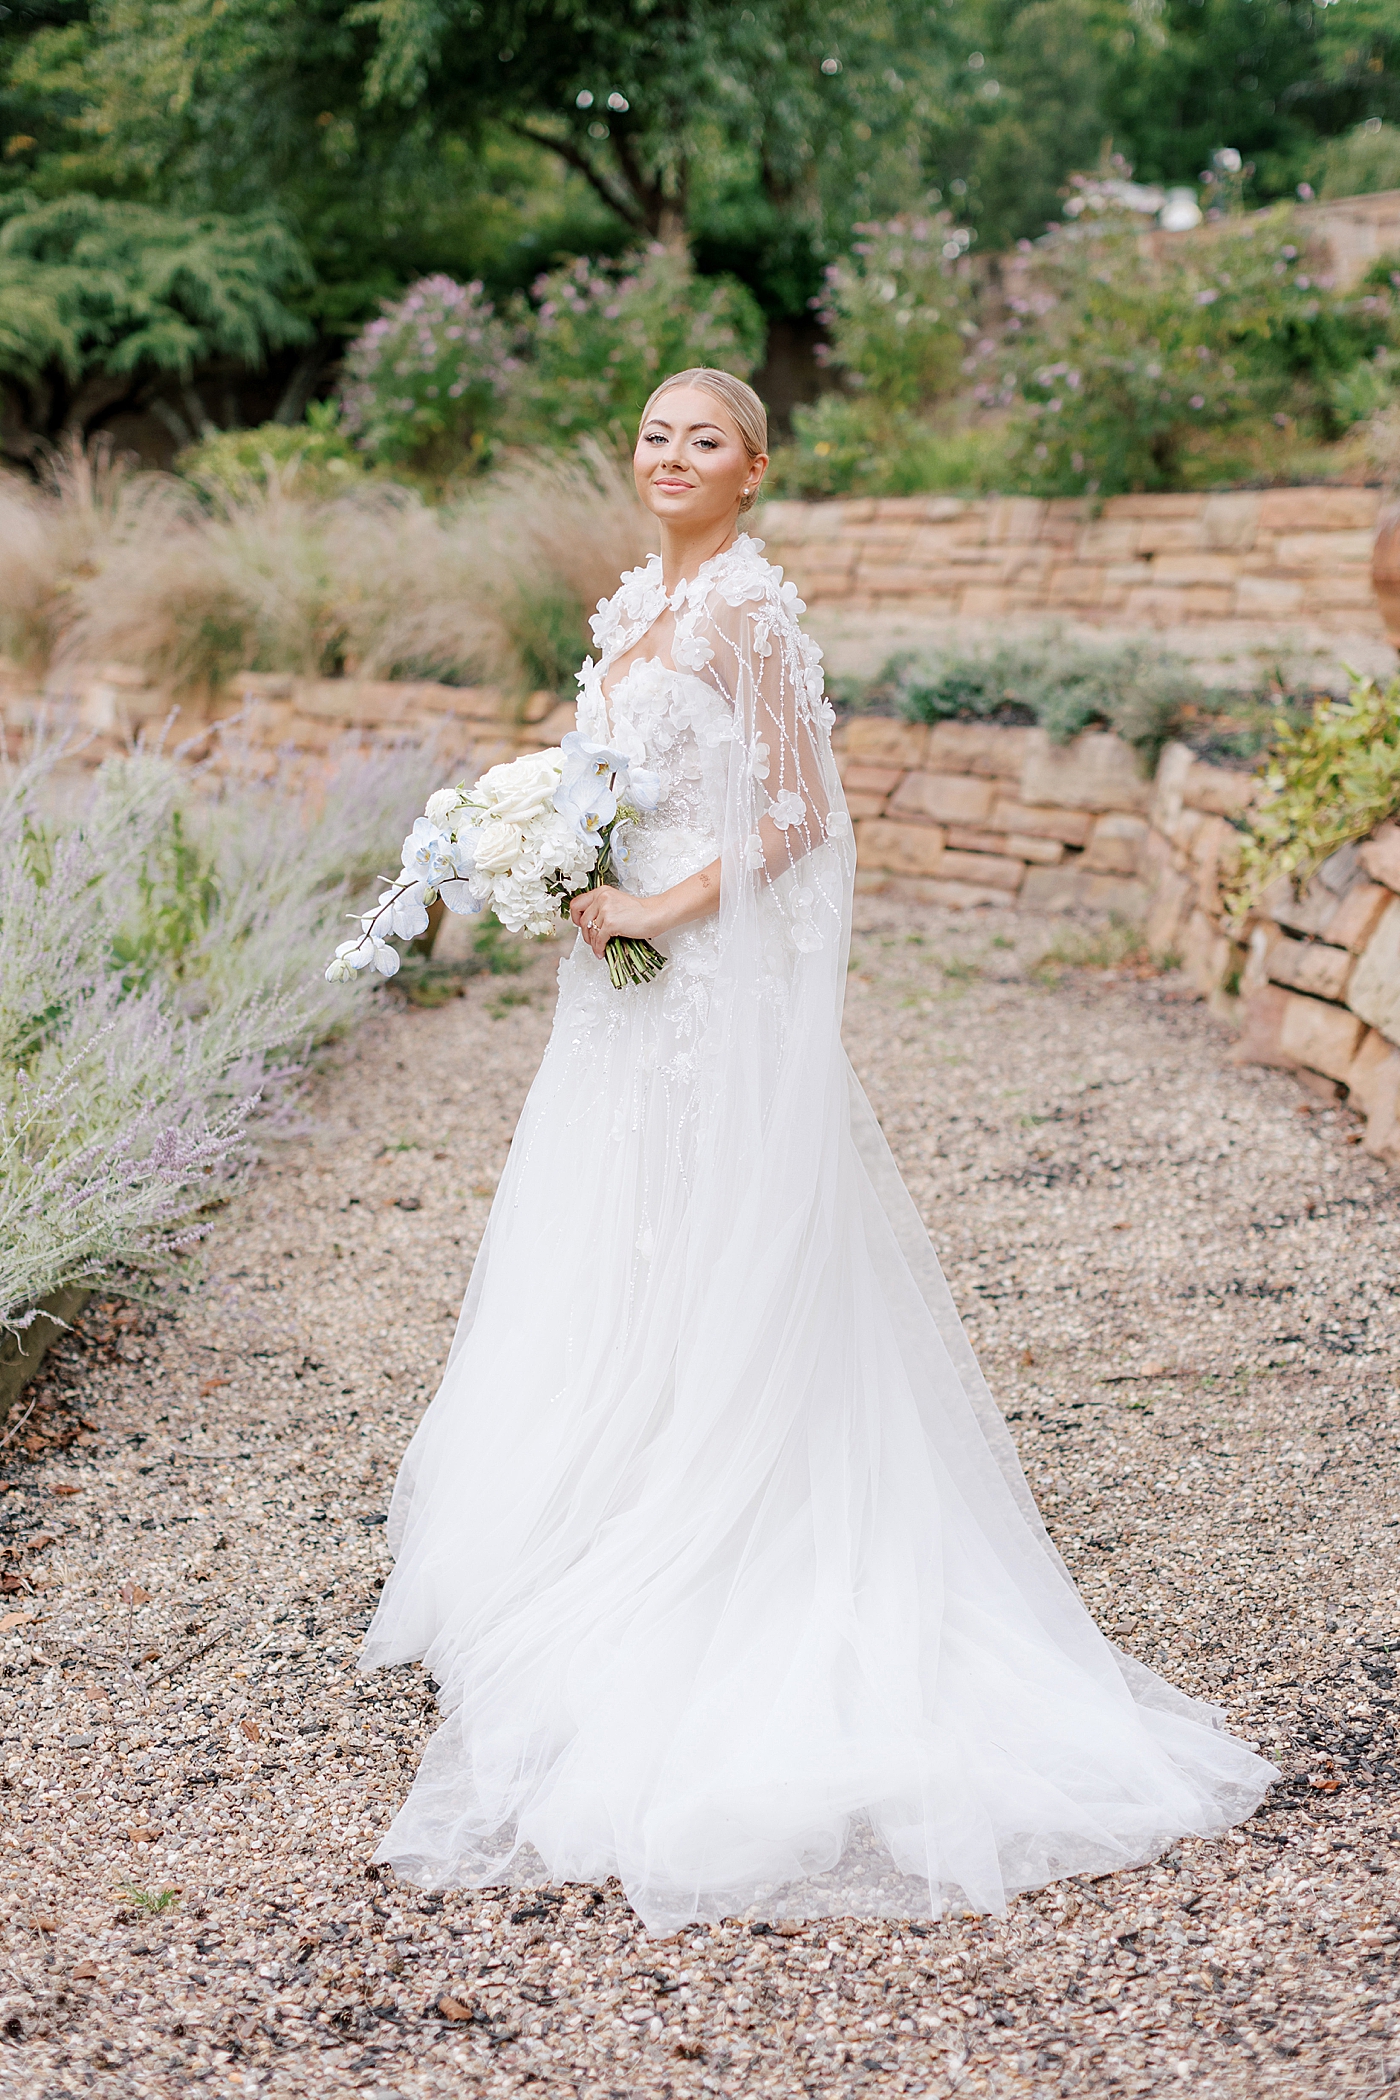 Bride with bouquet in a garden with lavender | Image by Hope Helmuth Photography